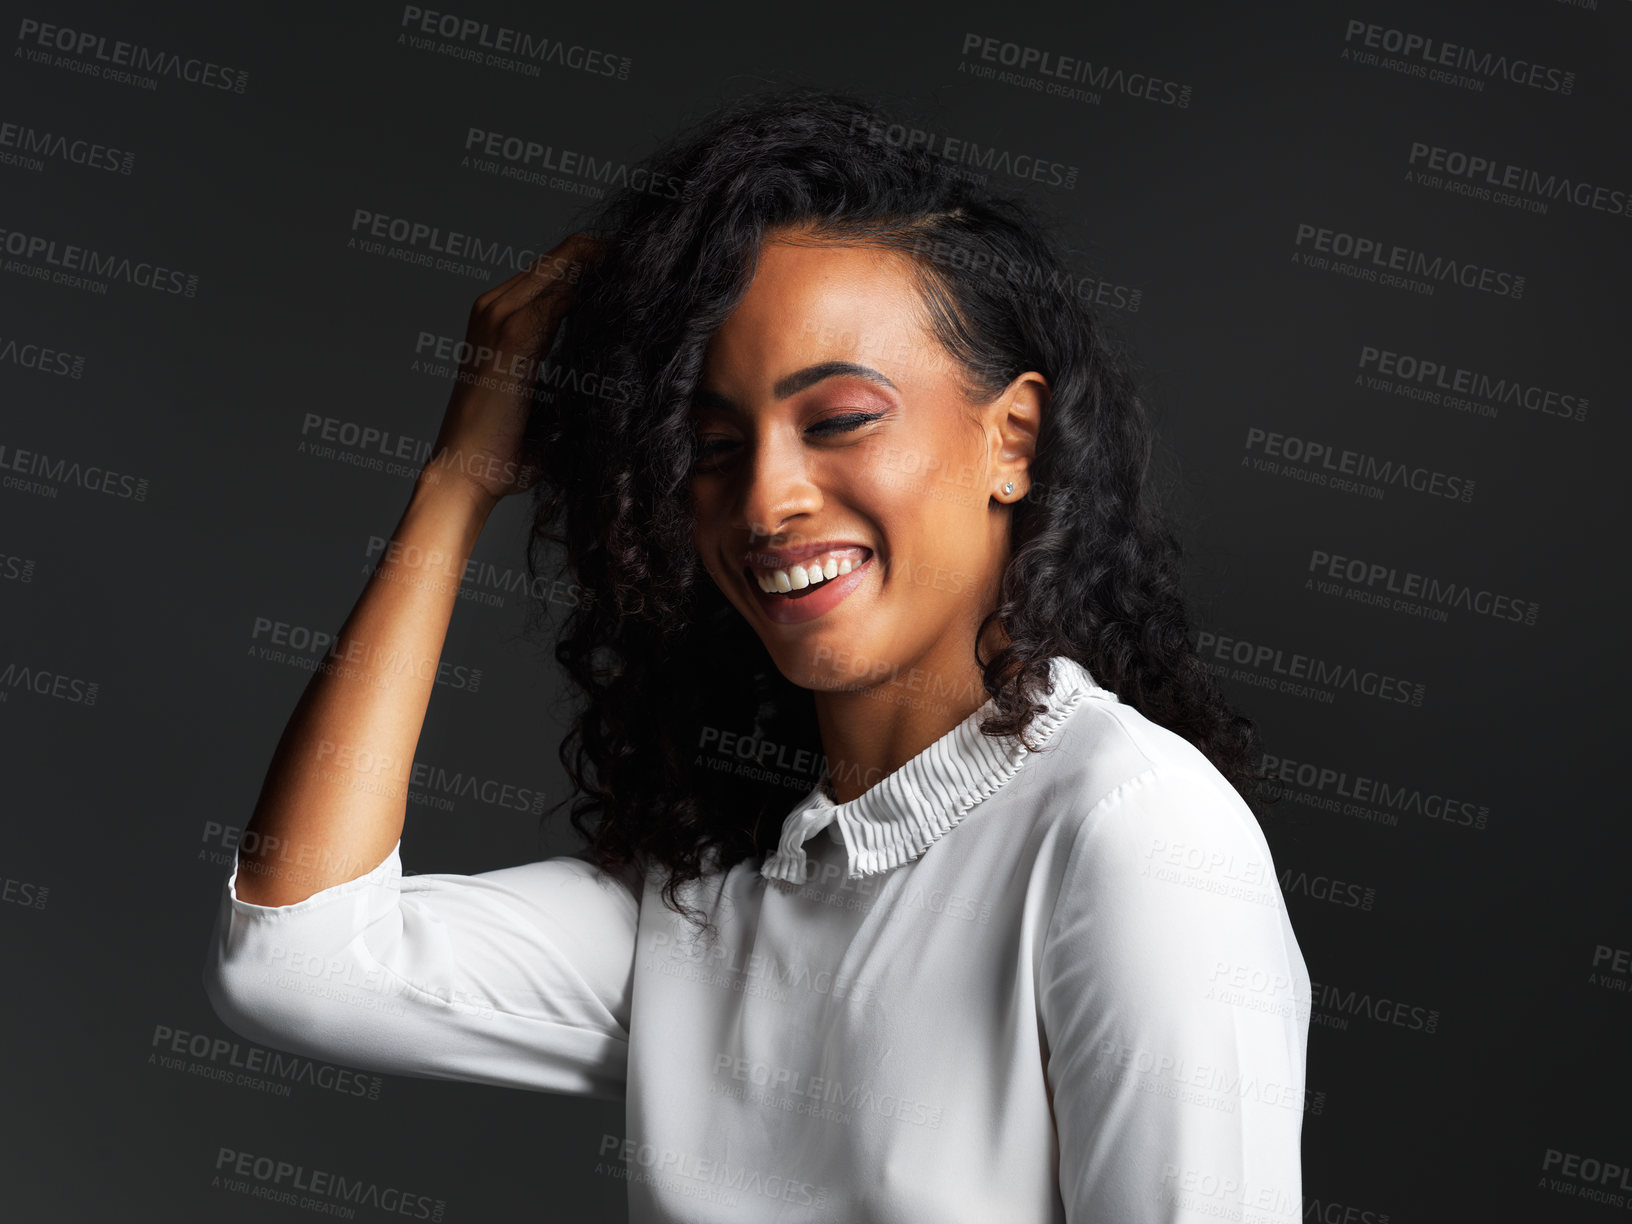 Buy stock photo Studio shot of an attractive young woman wearing a white blouse and smiling against a dark background